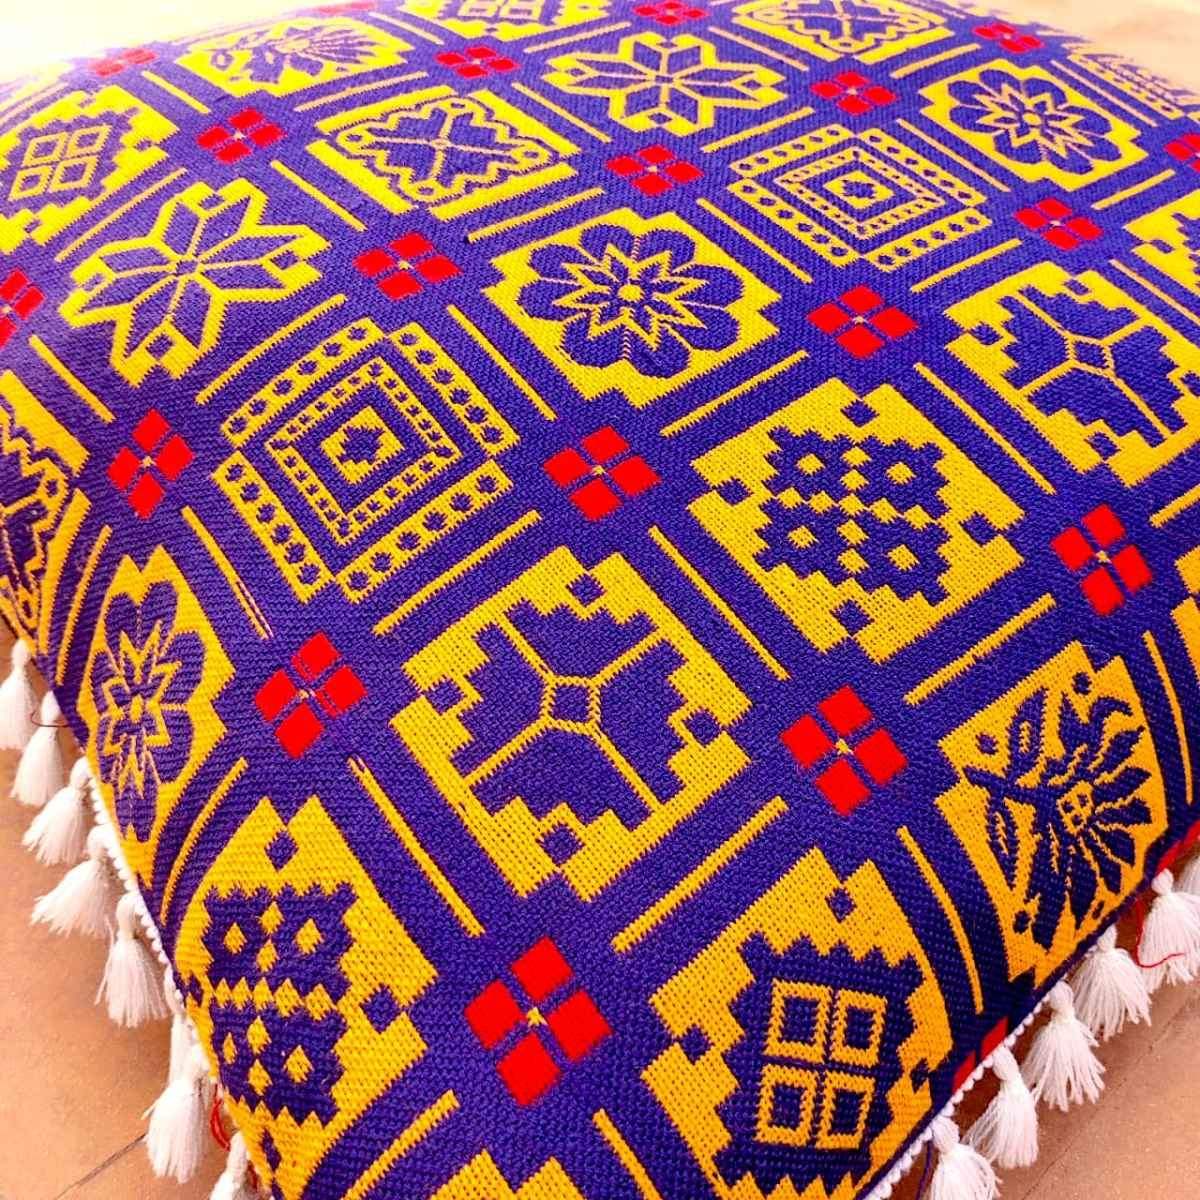 Traditional Floor Cushion Acrylic & polyester Inclusive of filing case size 26 x 26" Cover Relaxsit